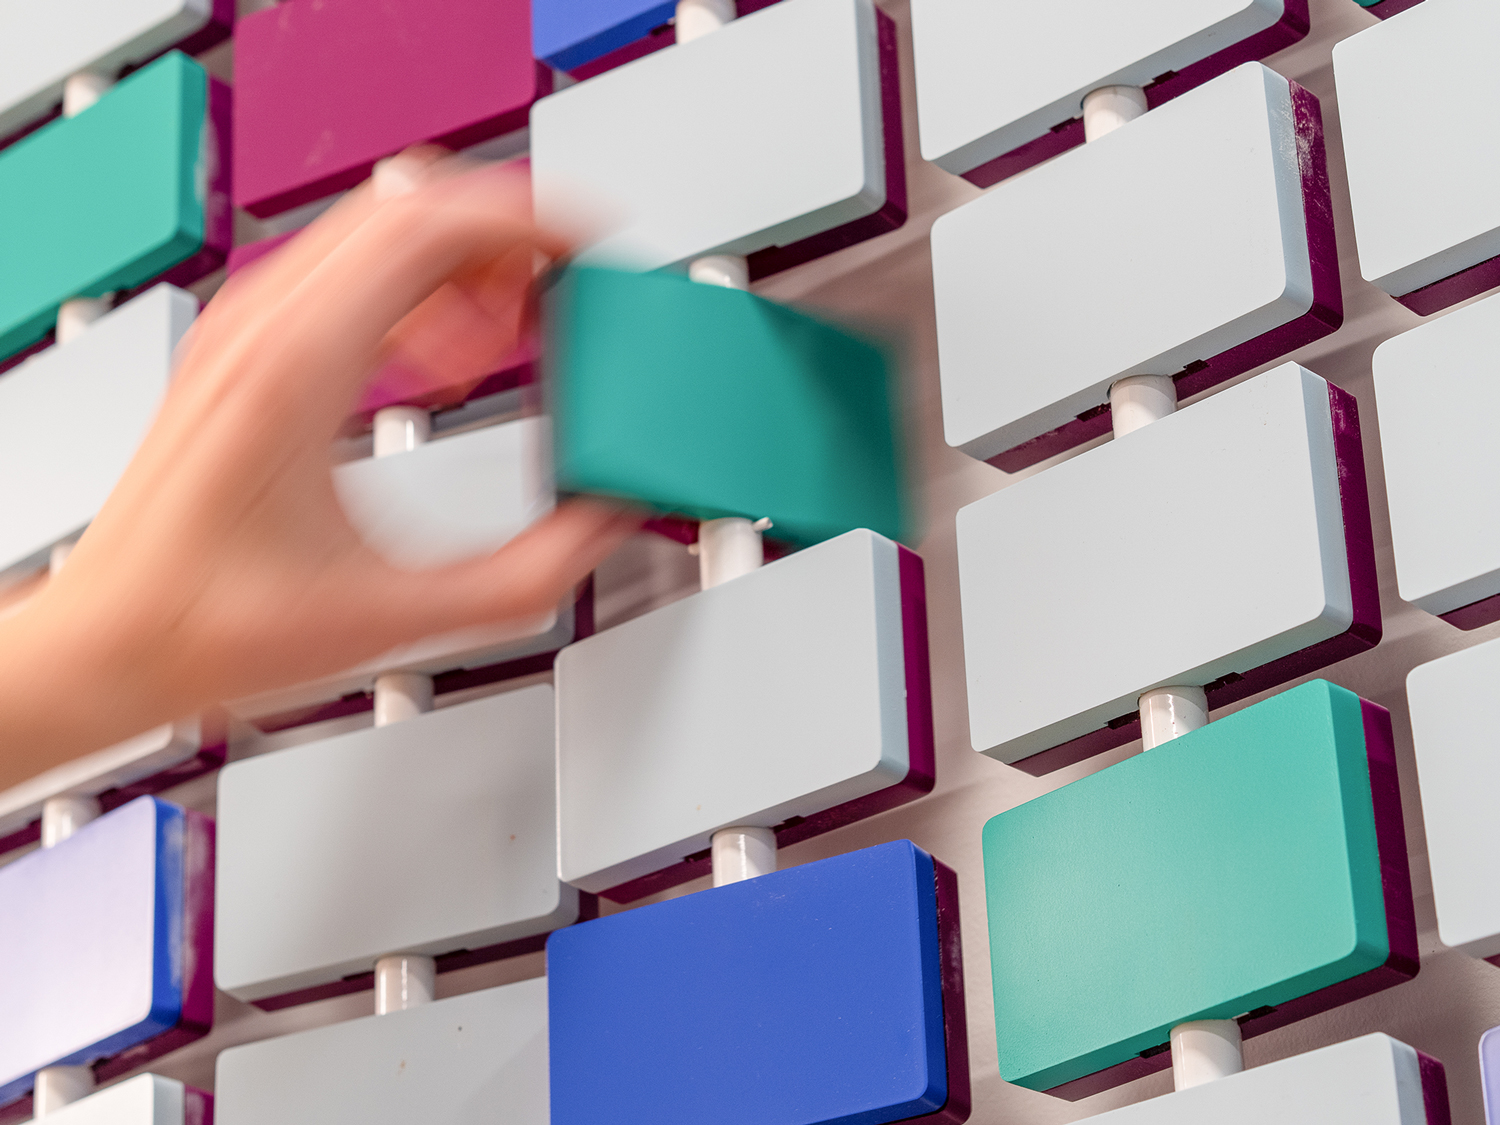 Detail image of interactive wall graphic, featuring colorful rotating blocks